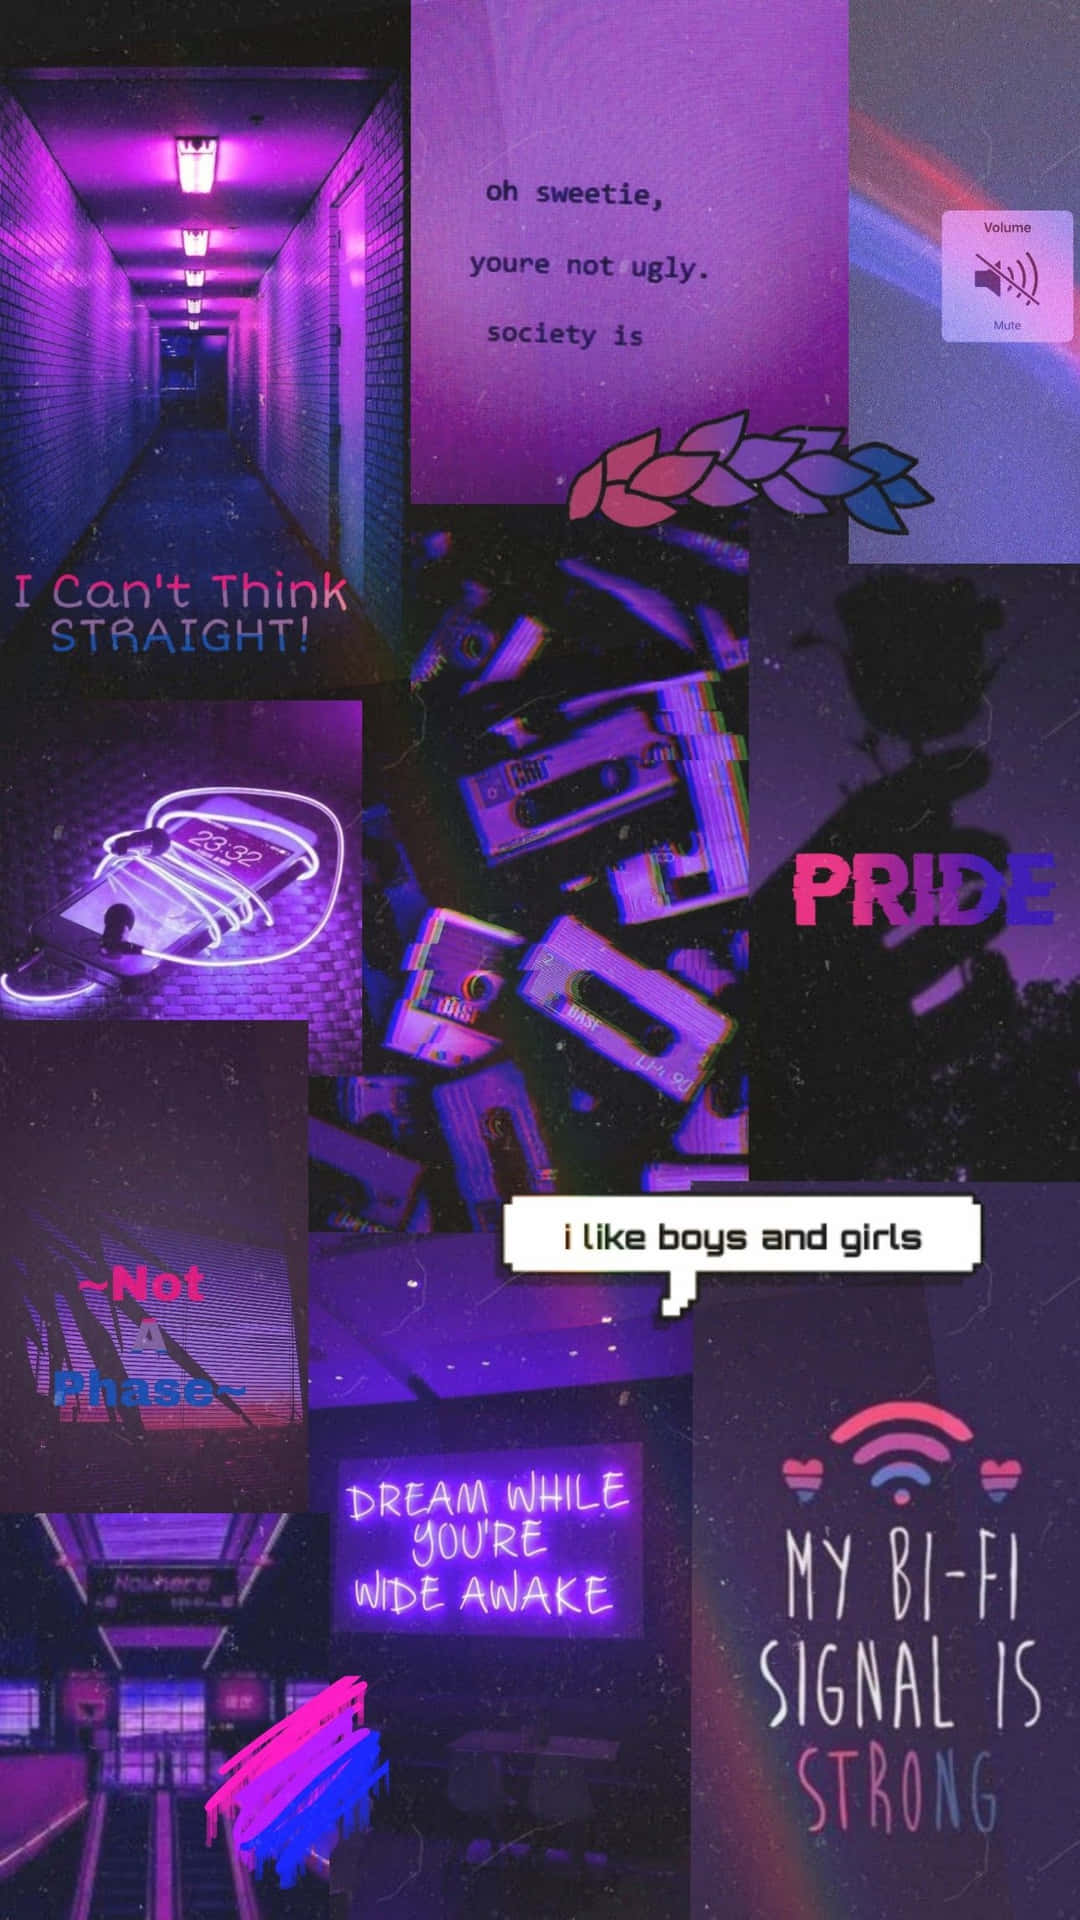 Download A Collage Of Purple Lights And Images | Wallpapers.com